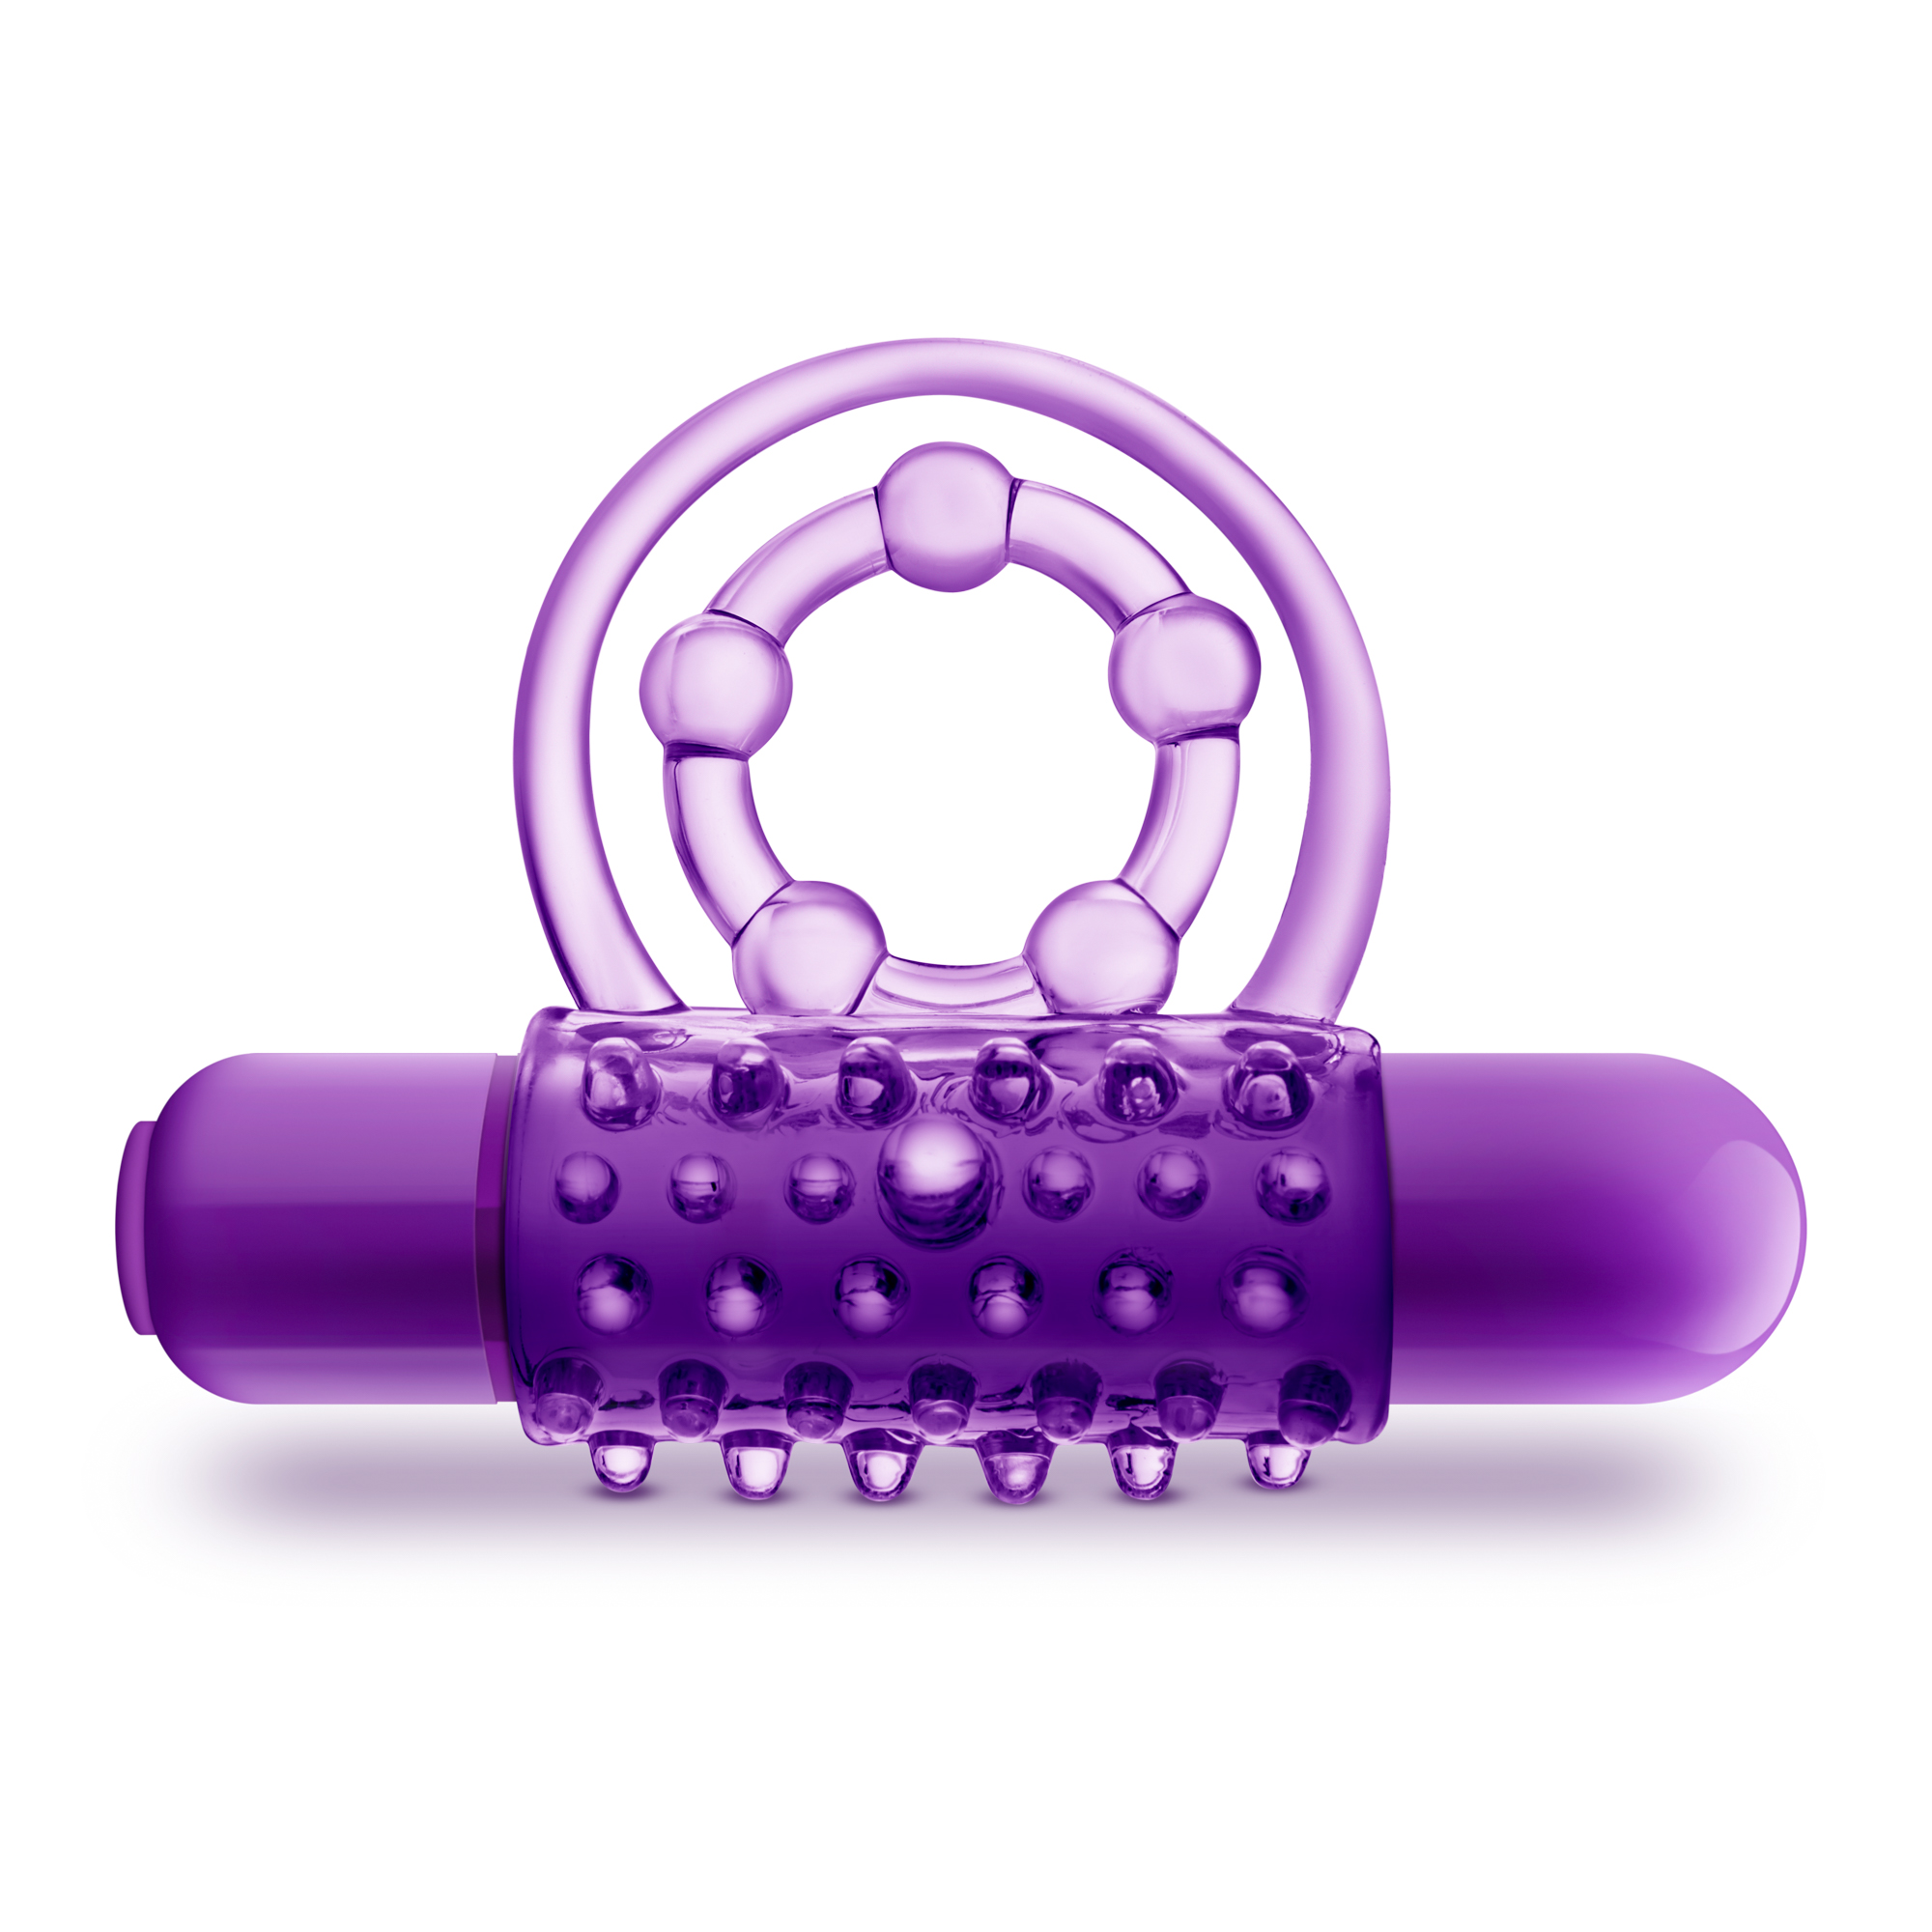 Bl 91911 Play With Me The Player Vibrating Double Strap Ring Purple Honey S Place